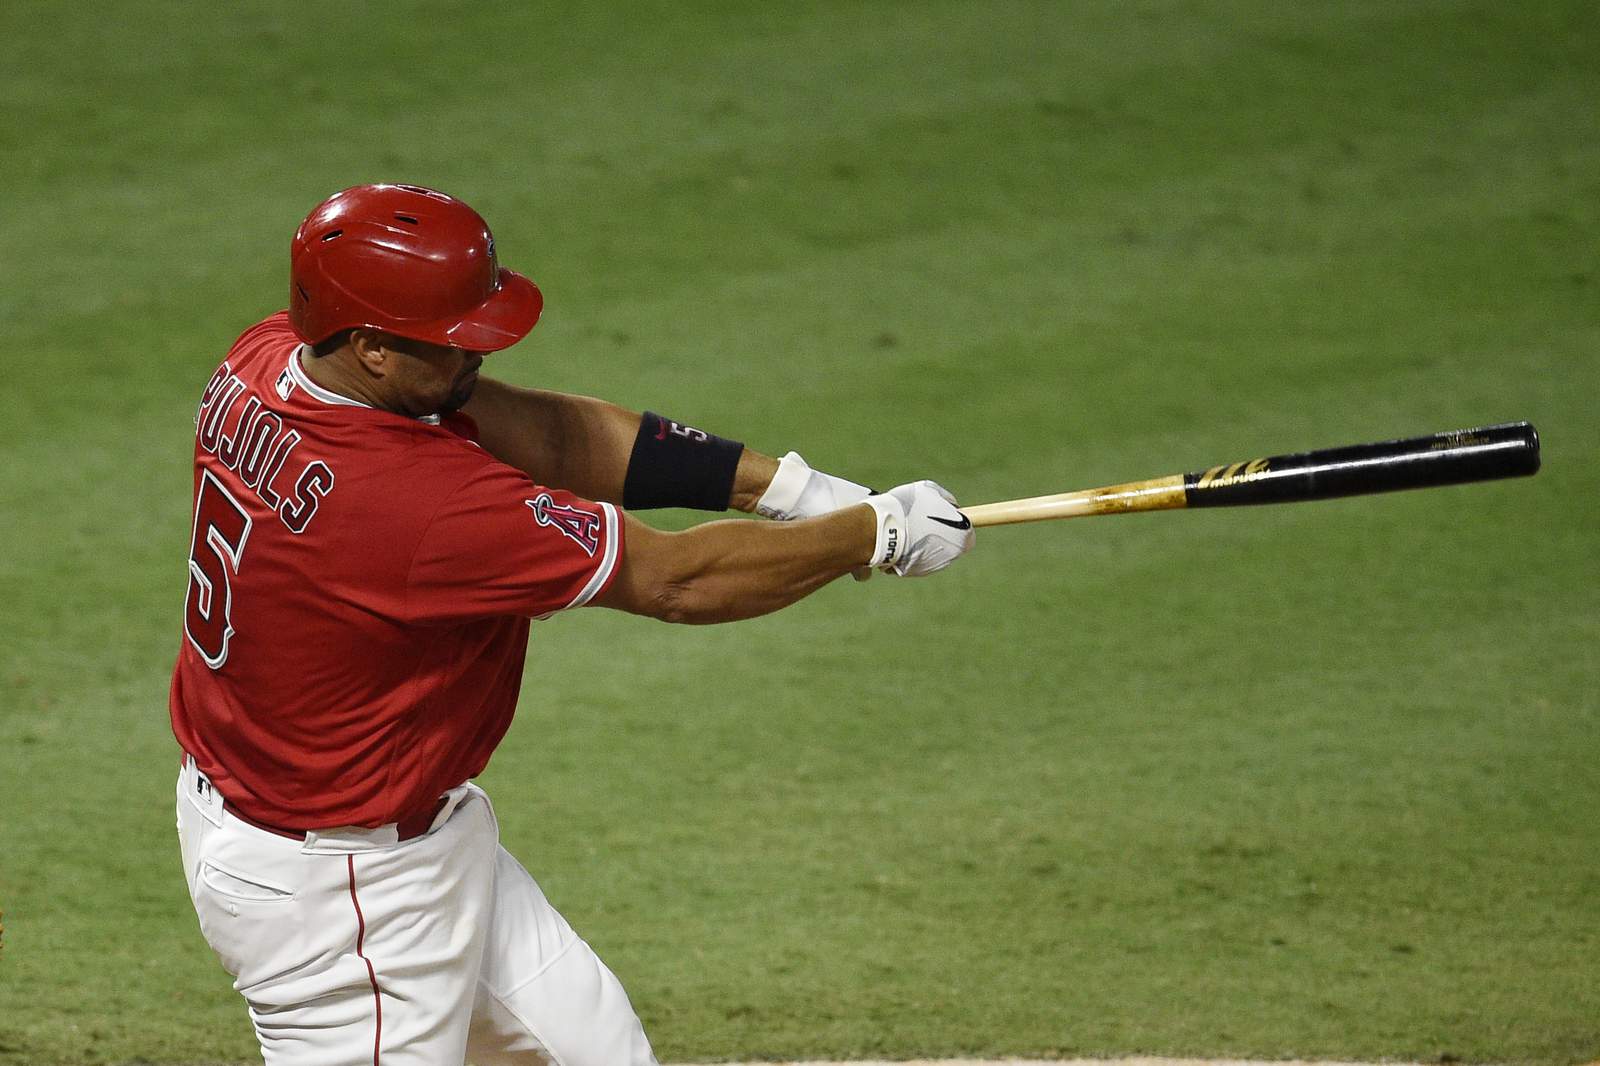 Pujols moves up, passes A-Rod on career RBIs chart